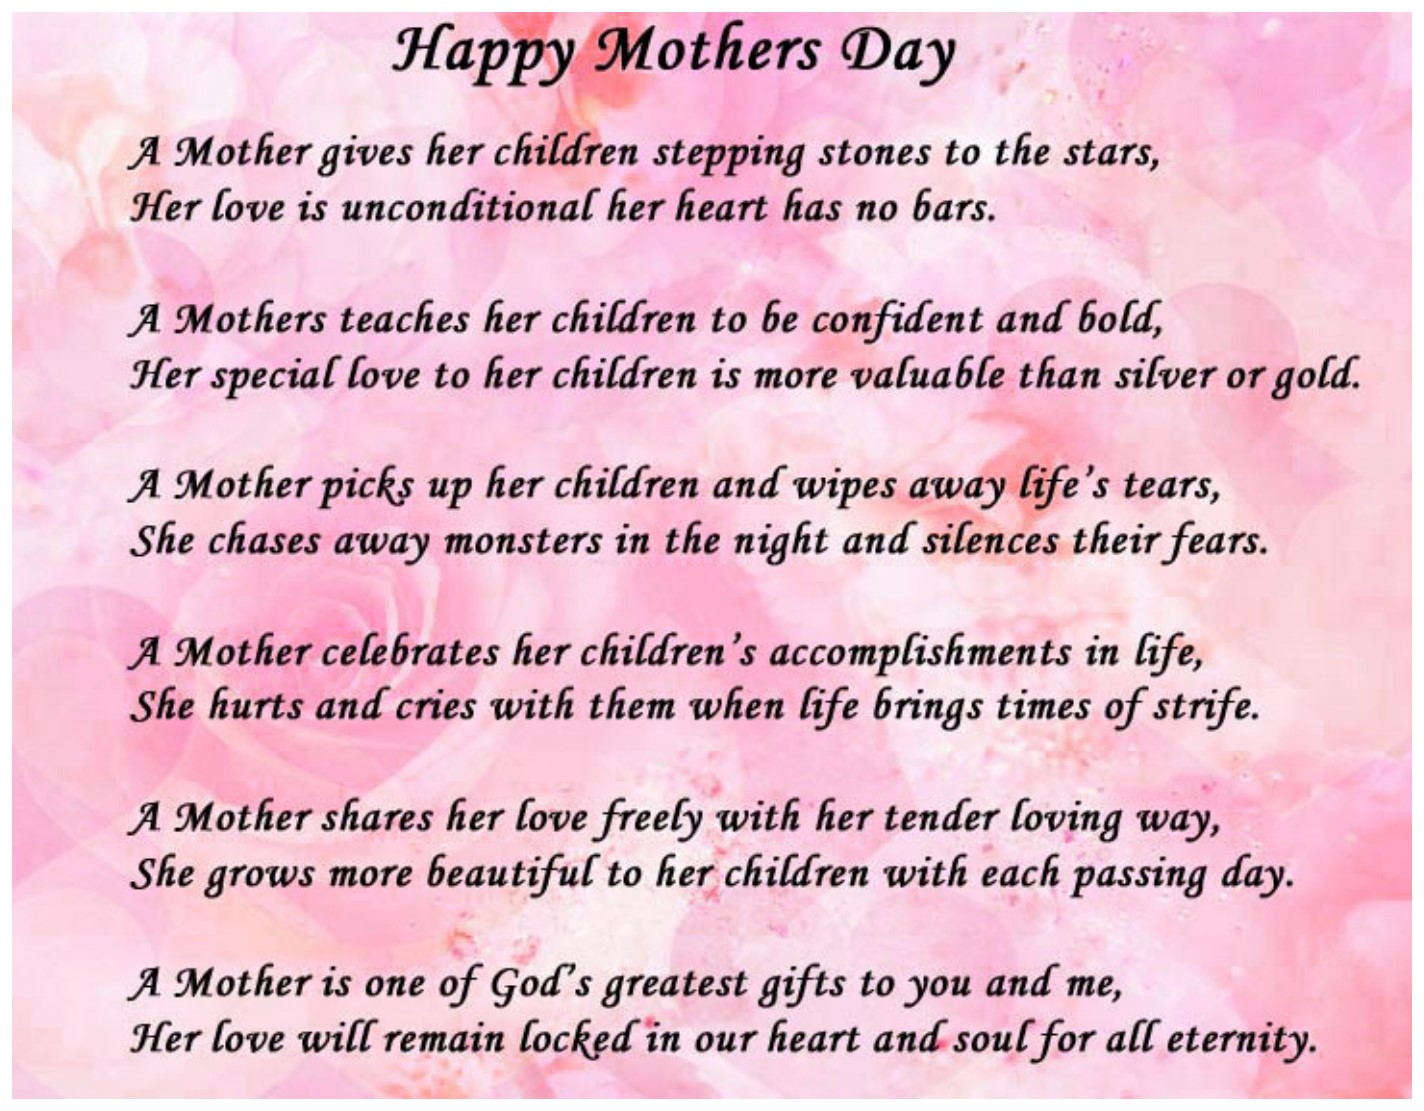 Happy Mothers Day 2018 HD Wallpaper Download Free  HD Walls